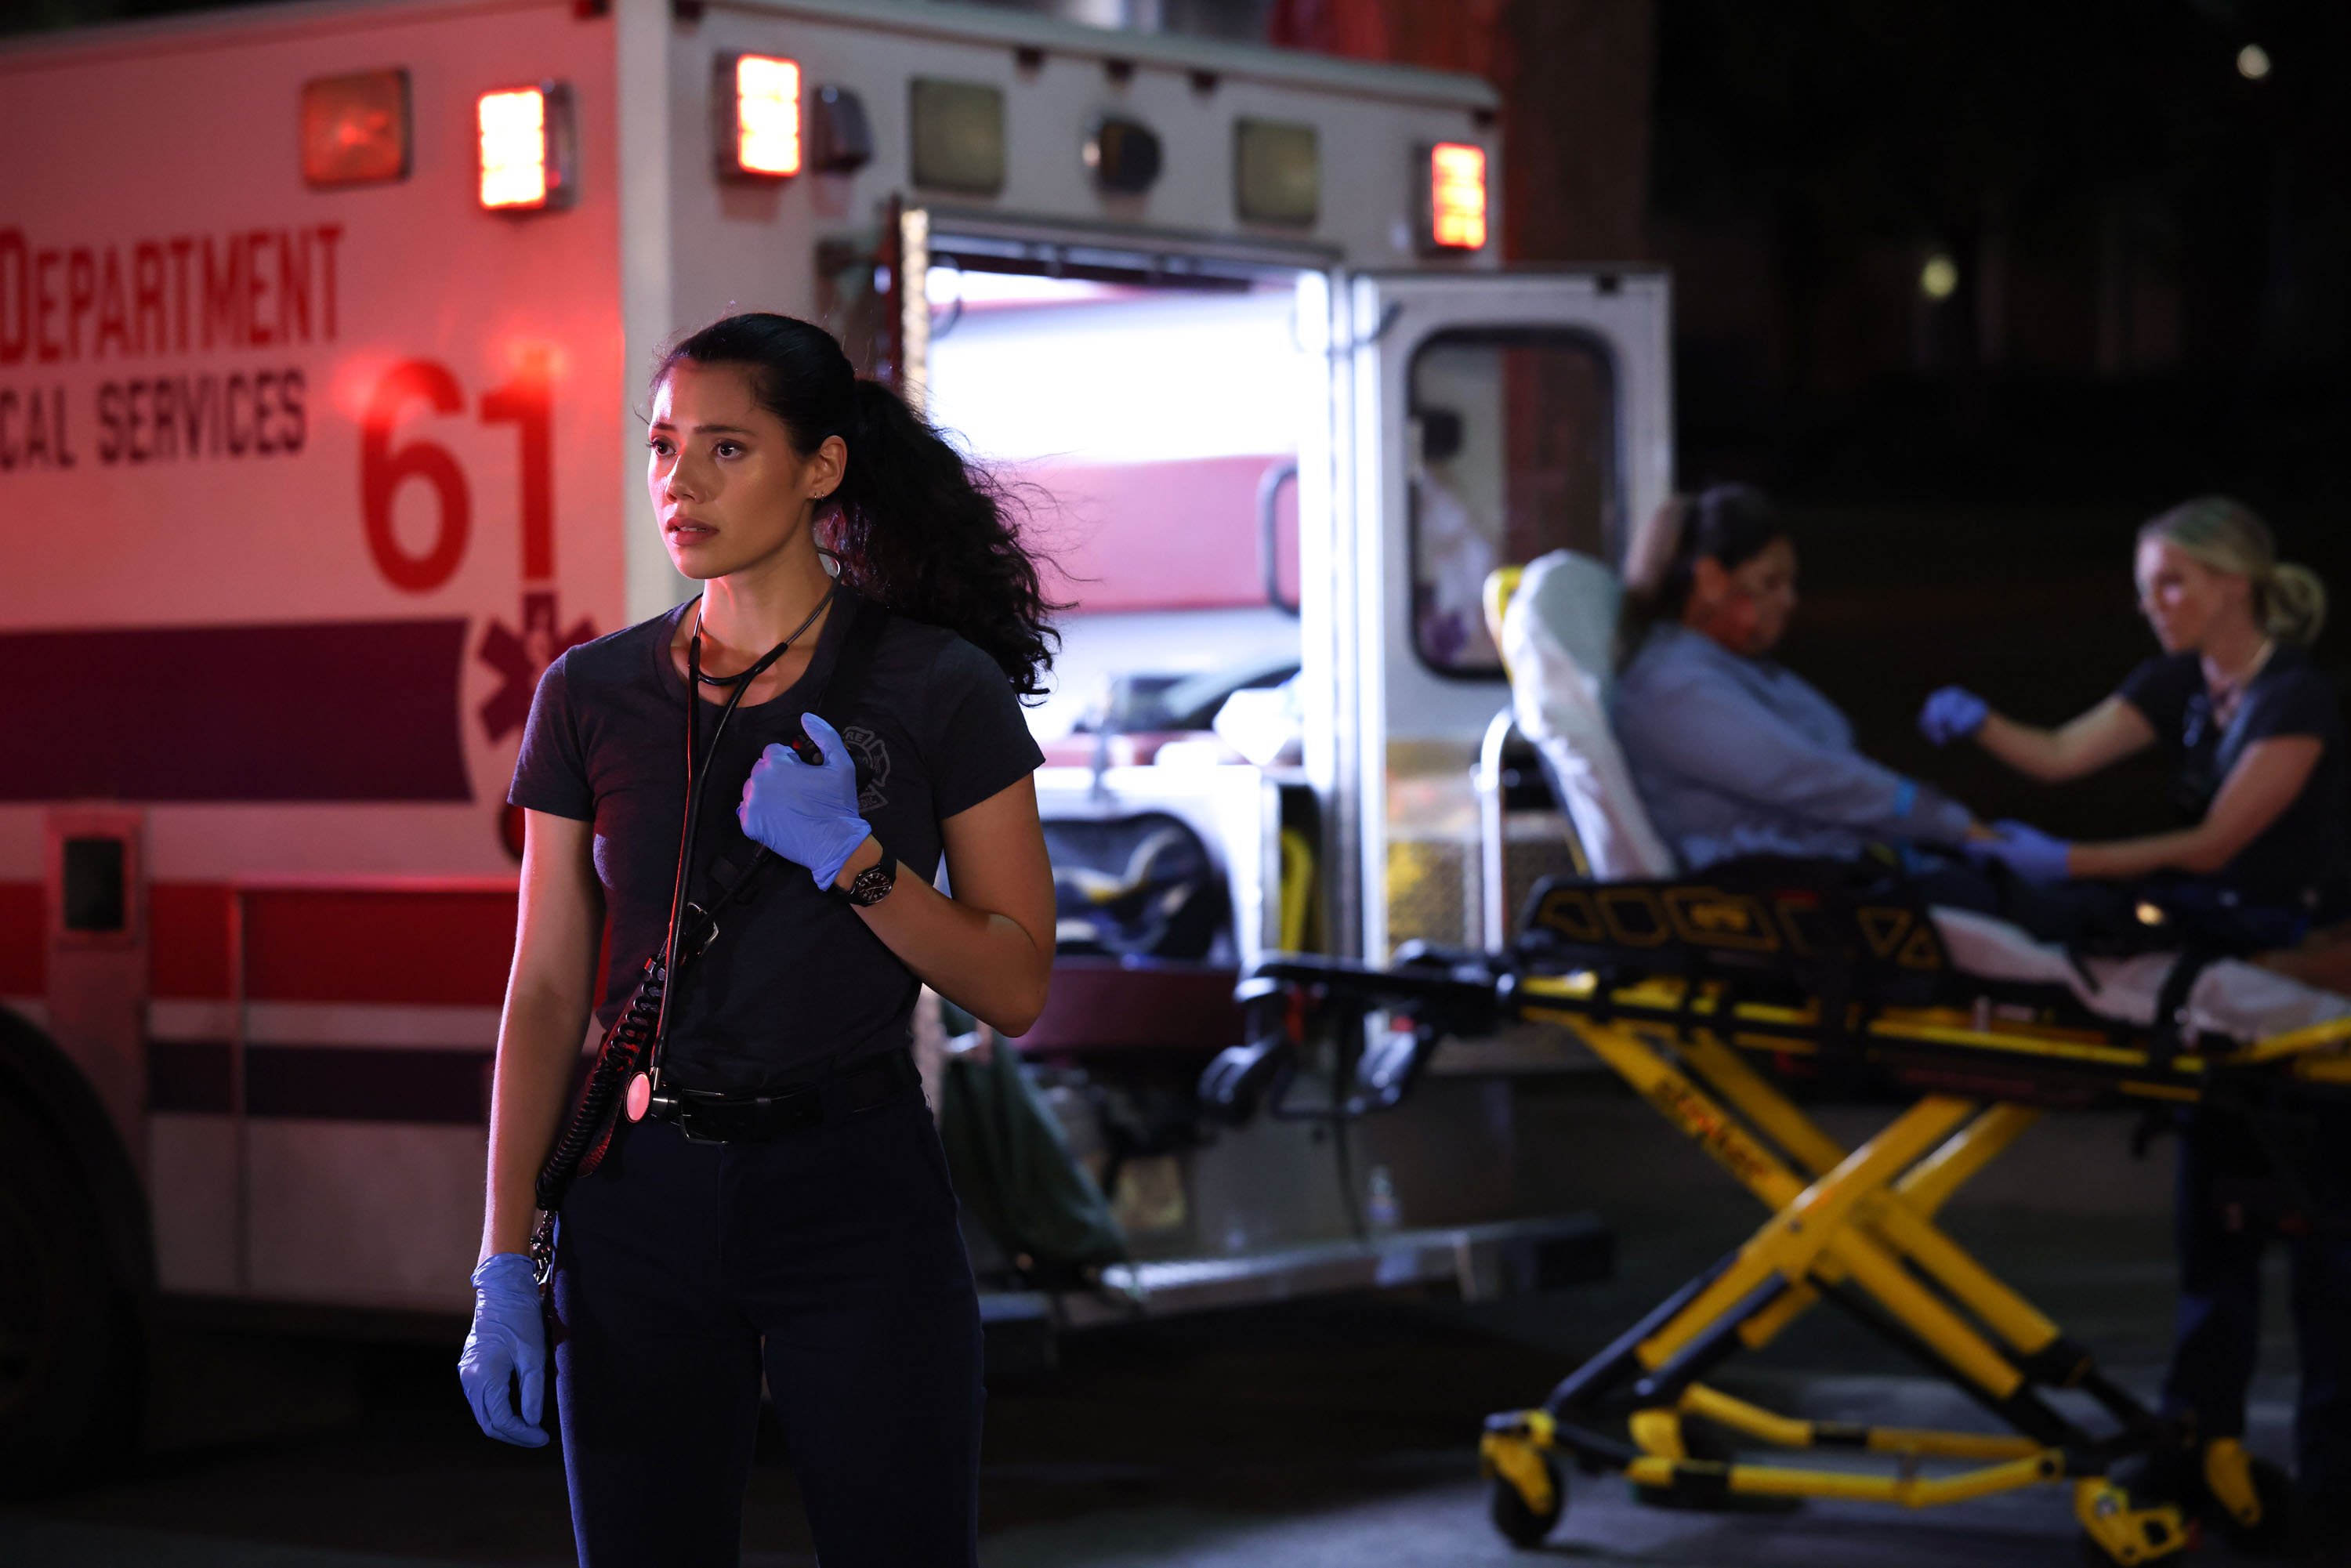 Hanako Greensmith as Violet standing in front of an ambulance in 'Chicago Fire' Season 11 Episode 3